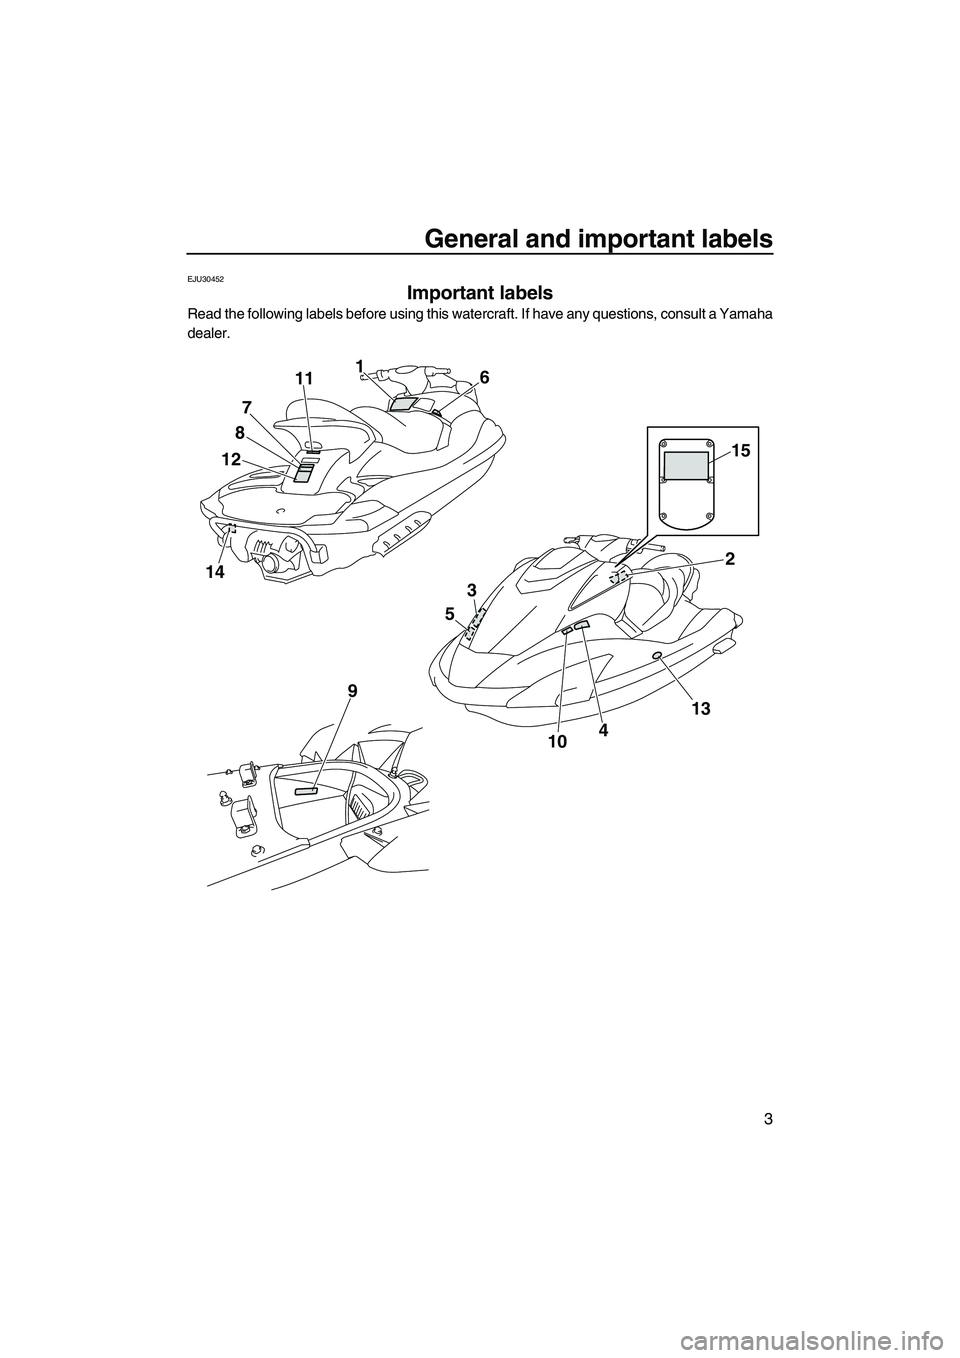 YAMAHA SVHO CRUISER 2011  Owners Manual General and important labels
3
EJU30452
Important labels 
Read the following labels before using this watercraft. If have any questions, consult a Yamaha
dealer.
14
1287111
6
4
9
132
3
5
10
15
UF1W73E